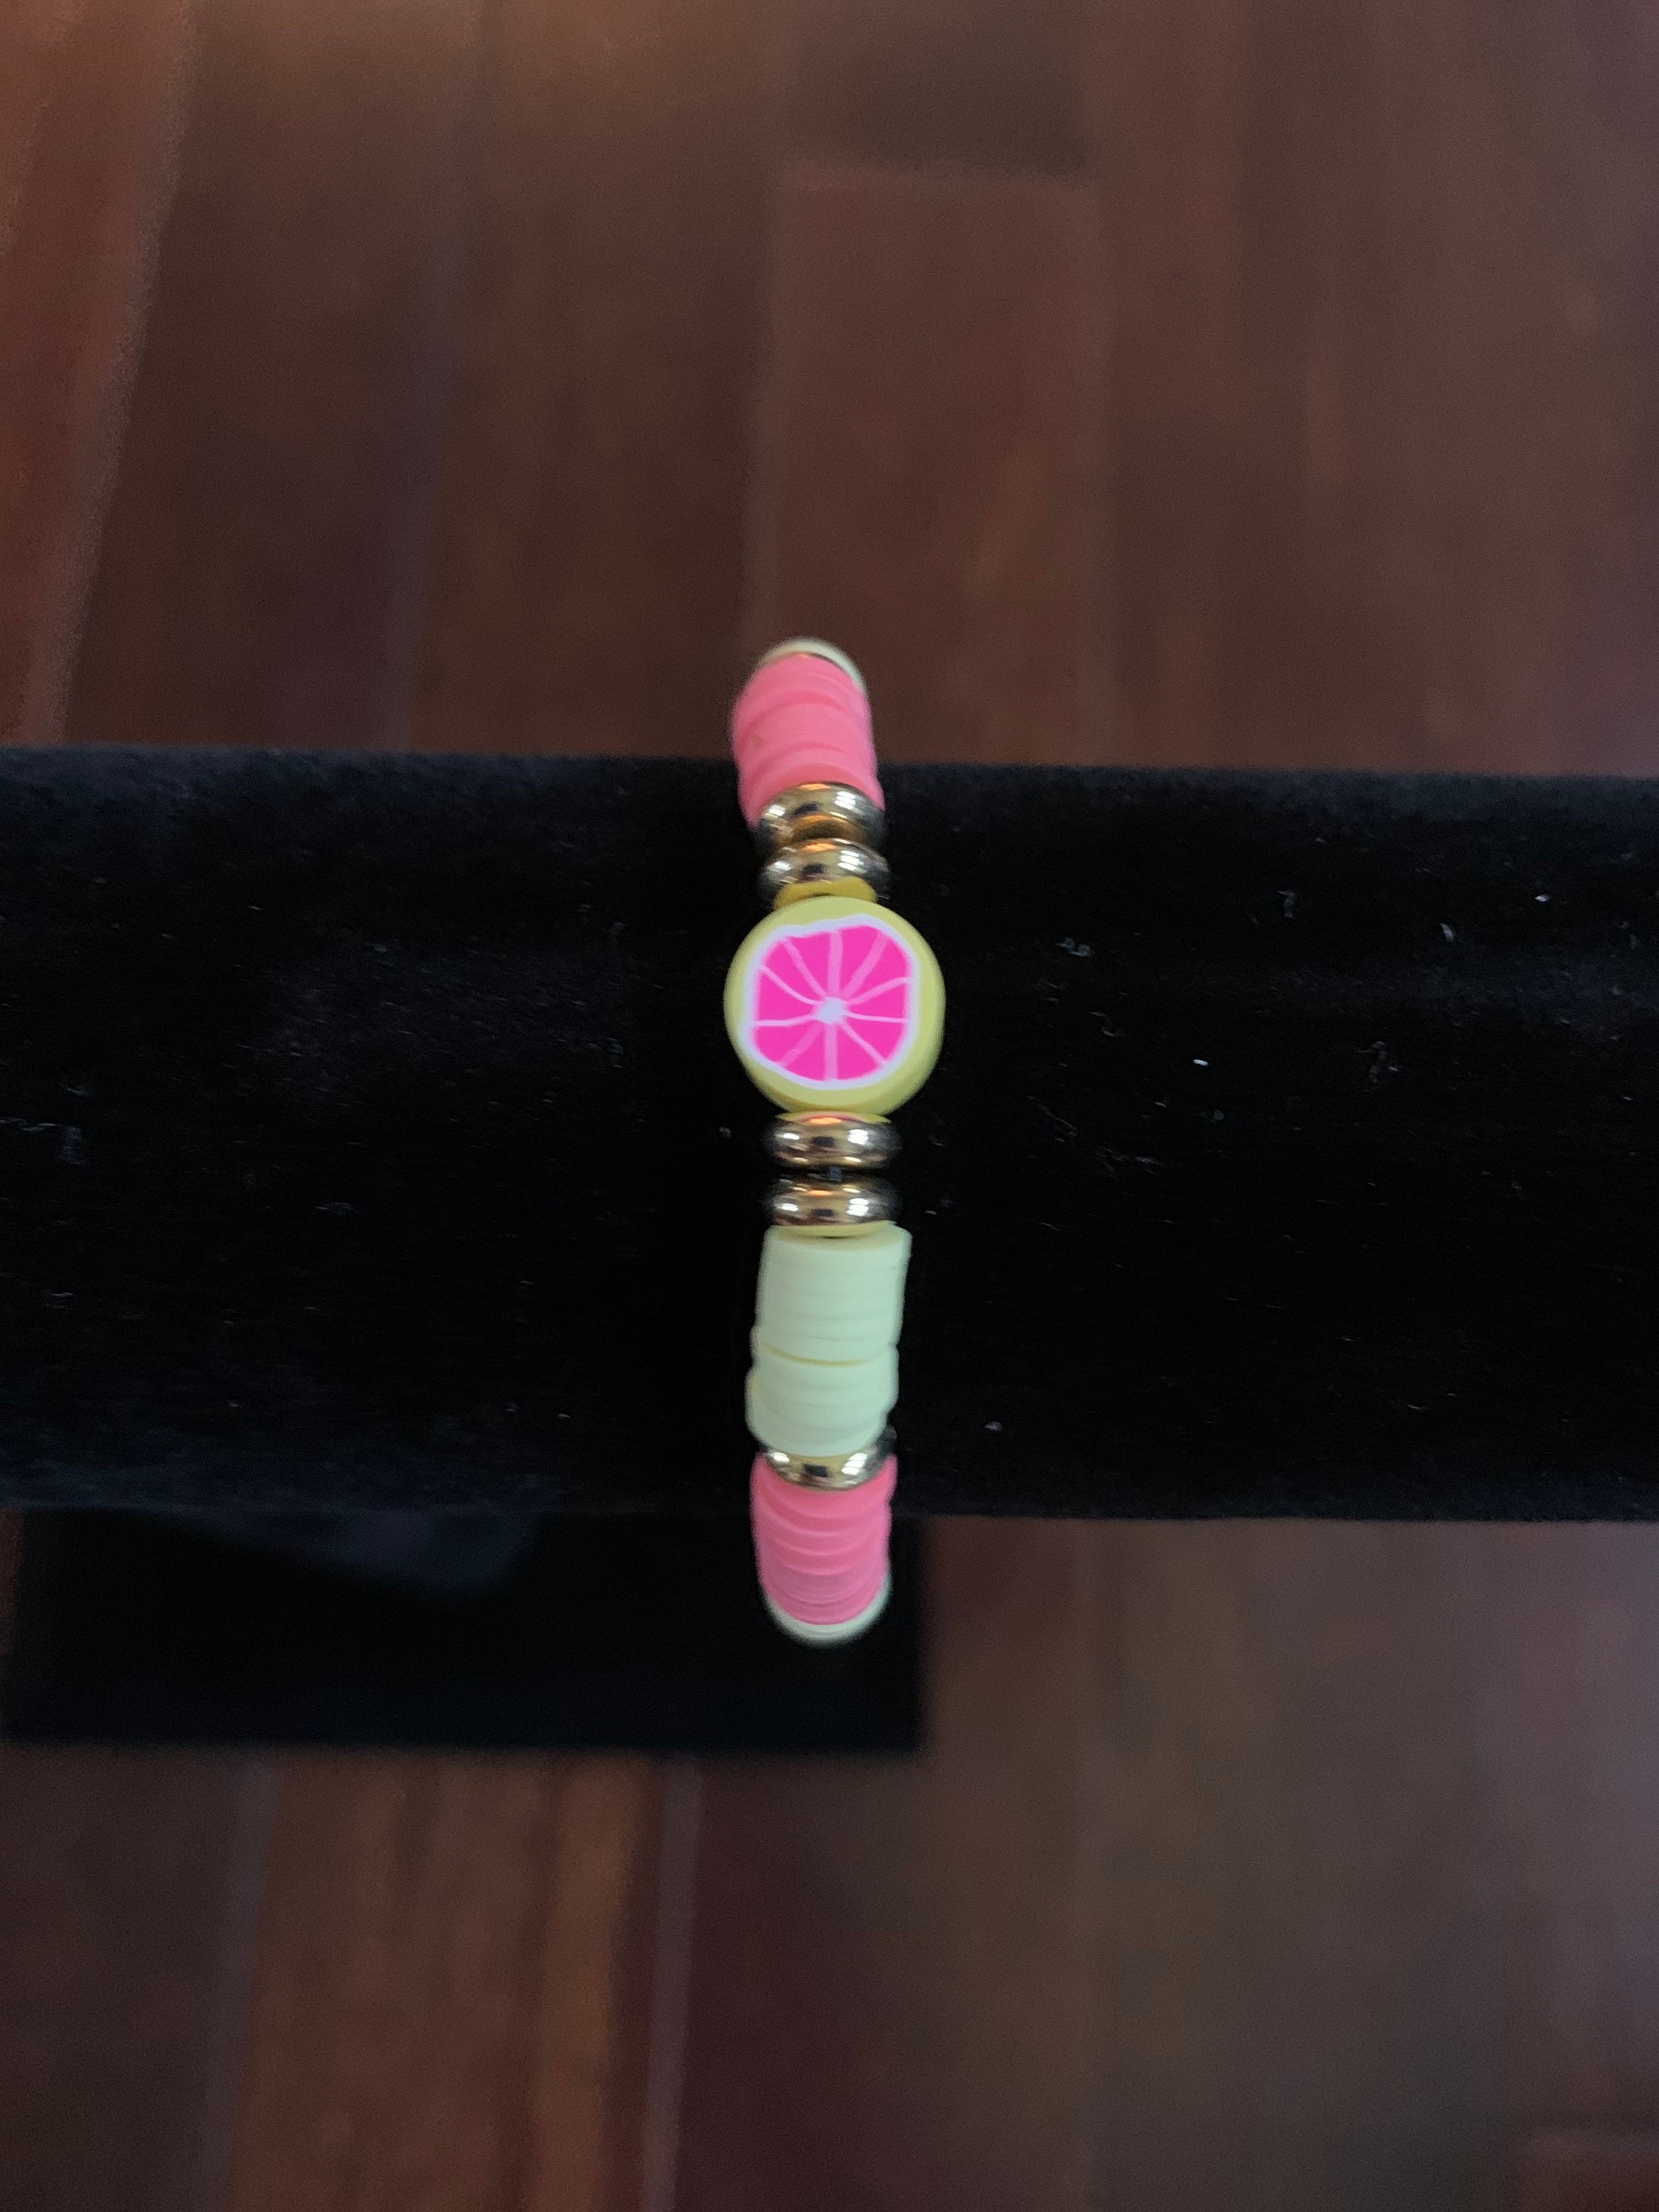 Pink and Rose Gold Clay Bead Bracelet Size Small 